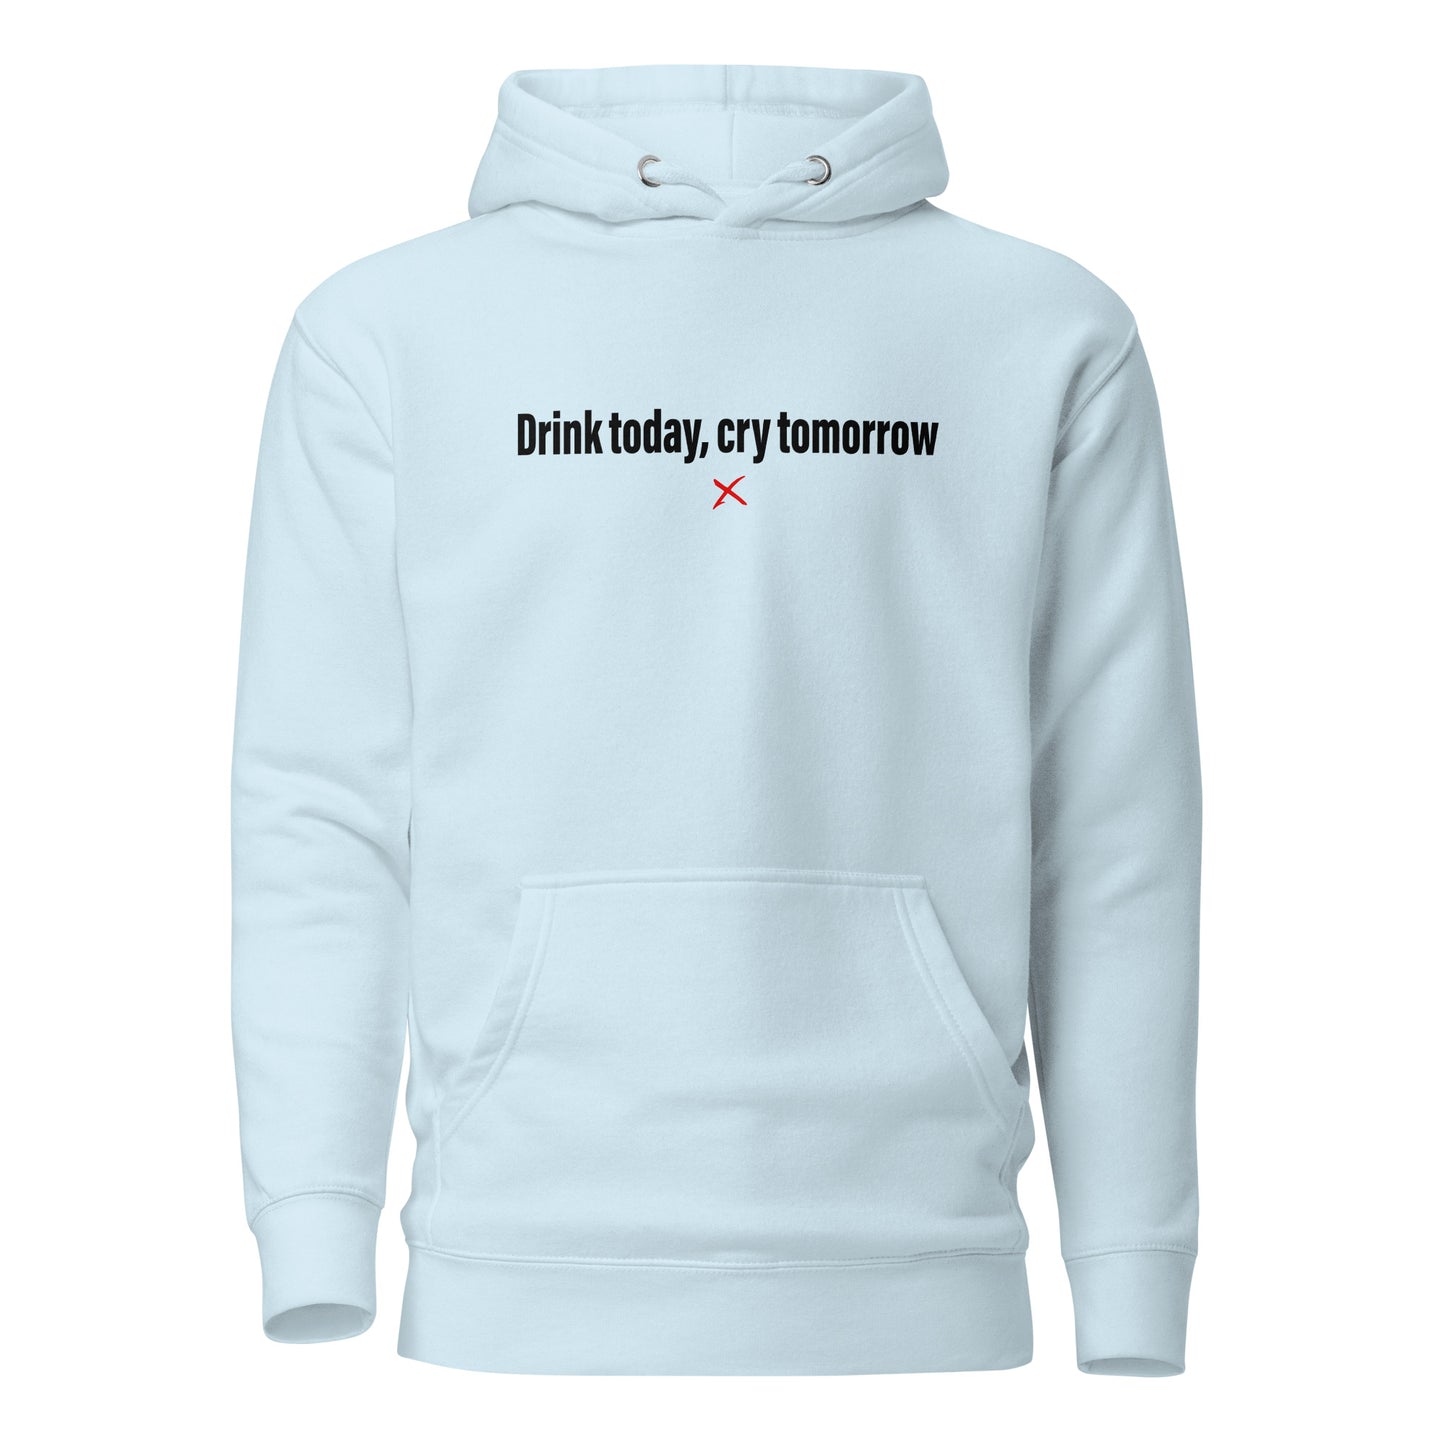 Drink today, cry tomorrow - Hoodie